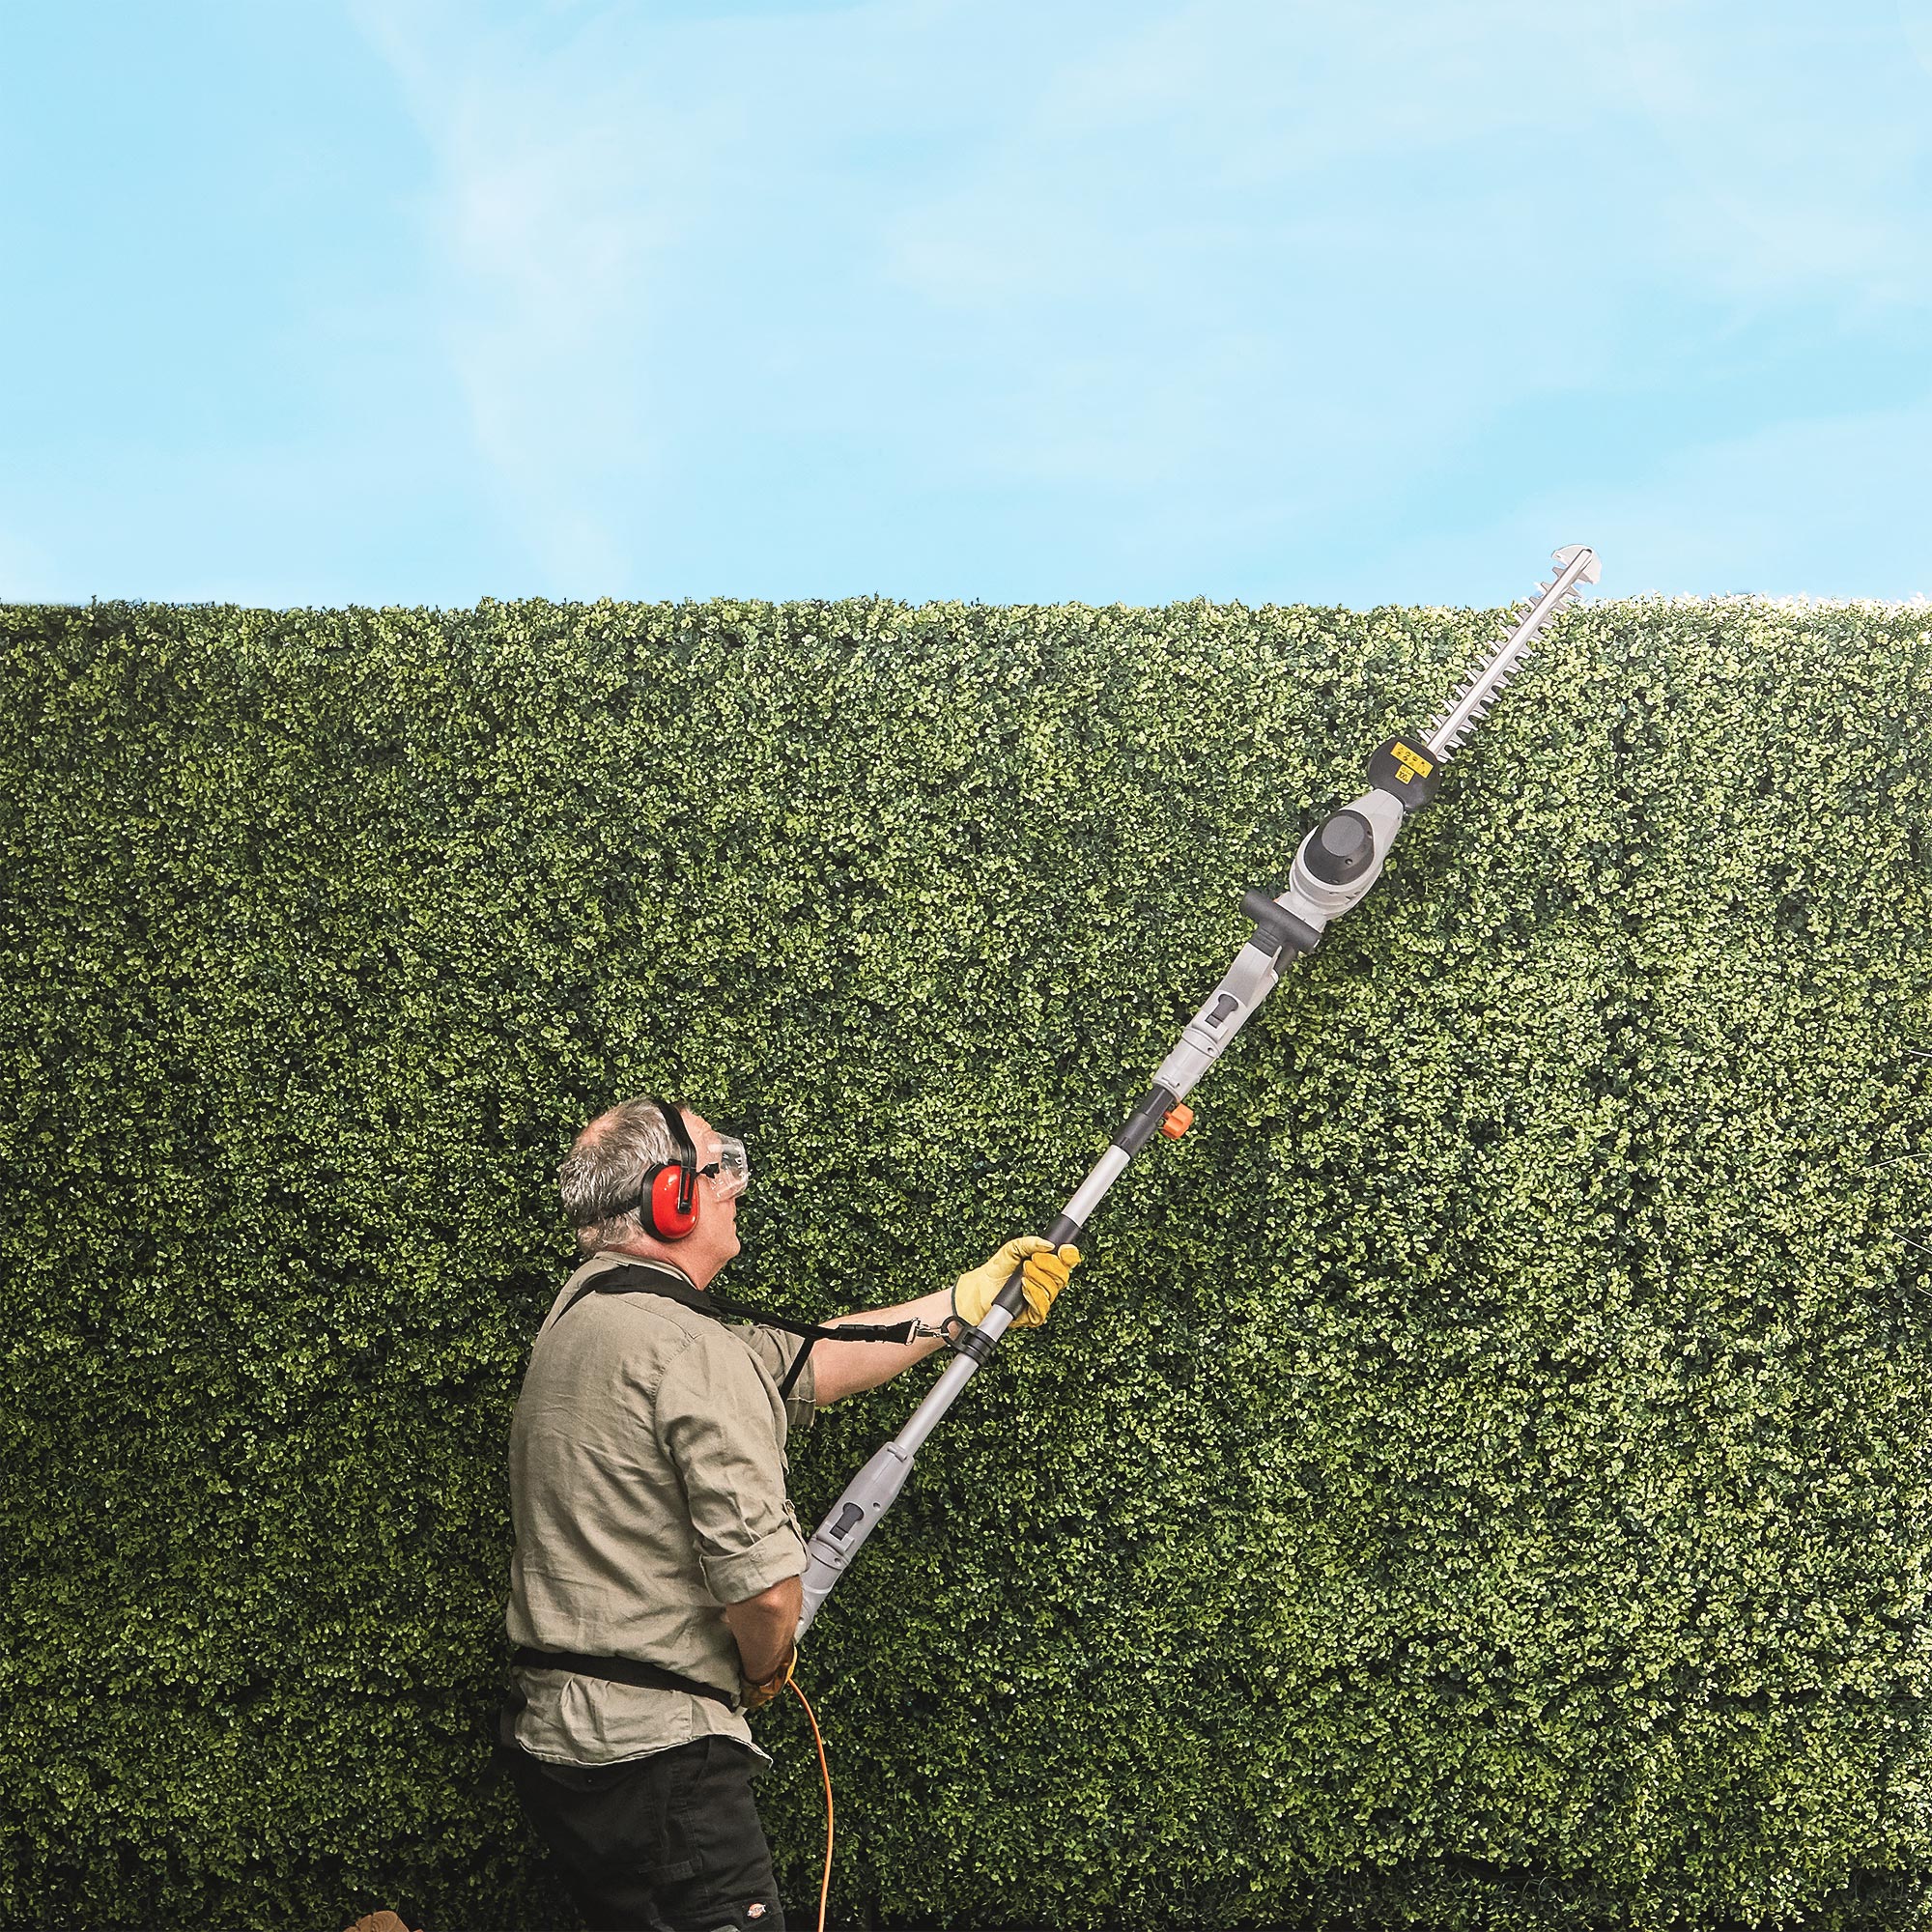 pole type hedge trimmers